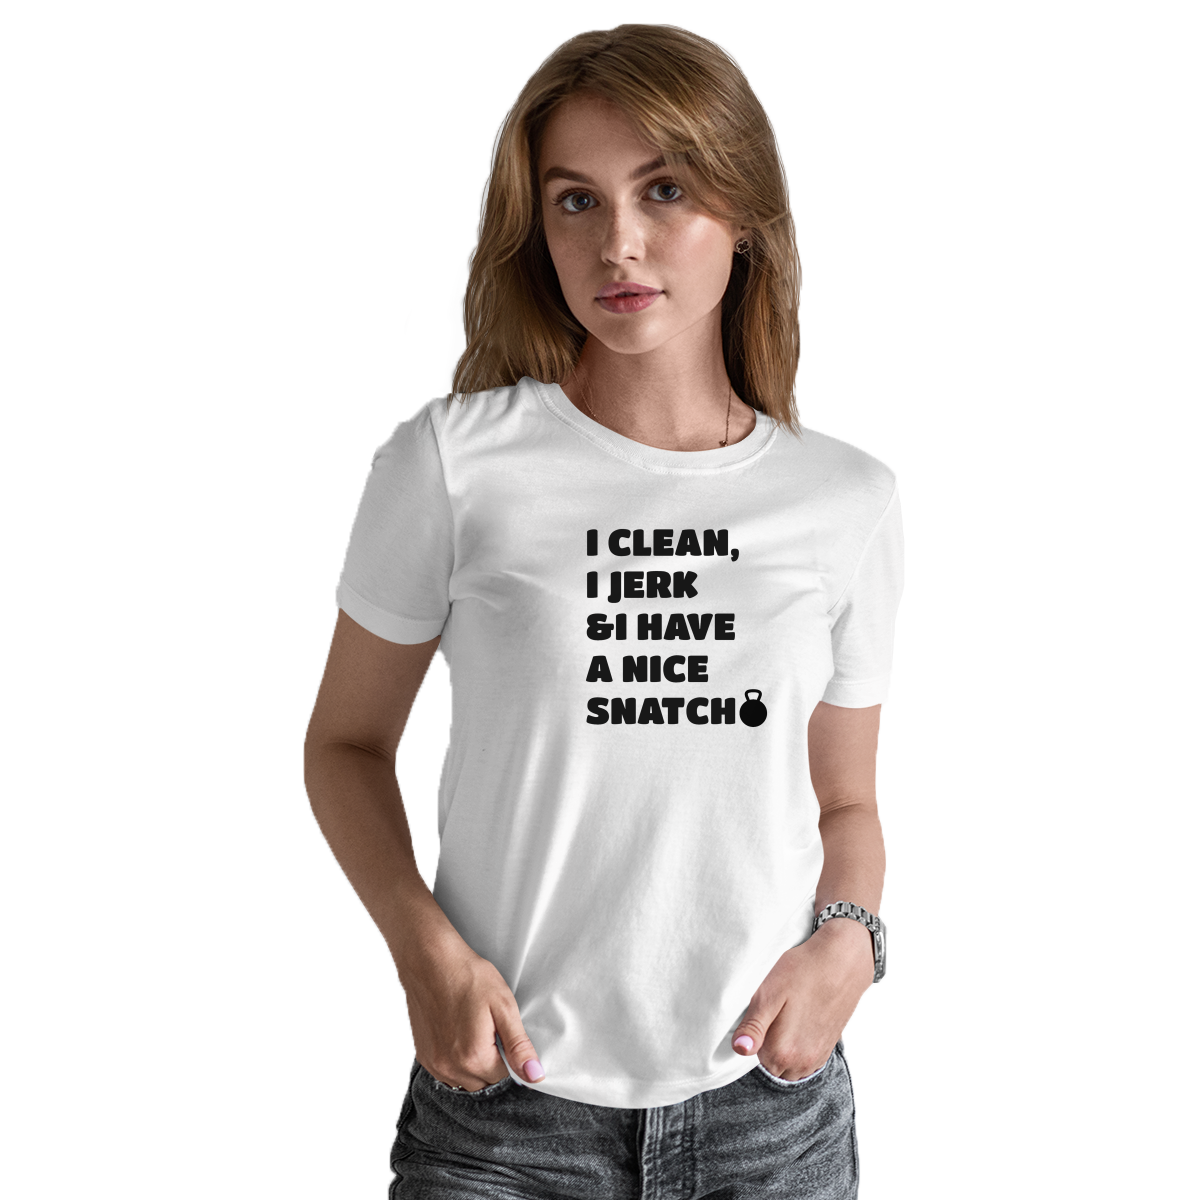 I Clean, Jerk & I Have a Nice SNATCH Women's T-shirt | White